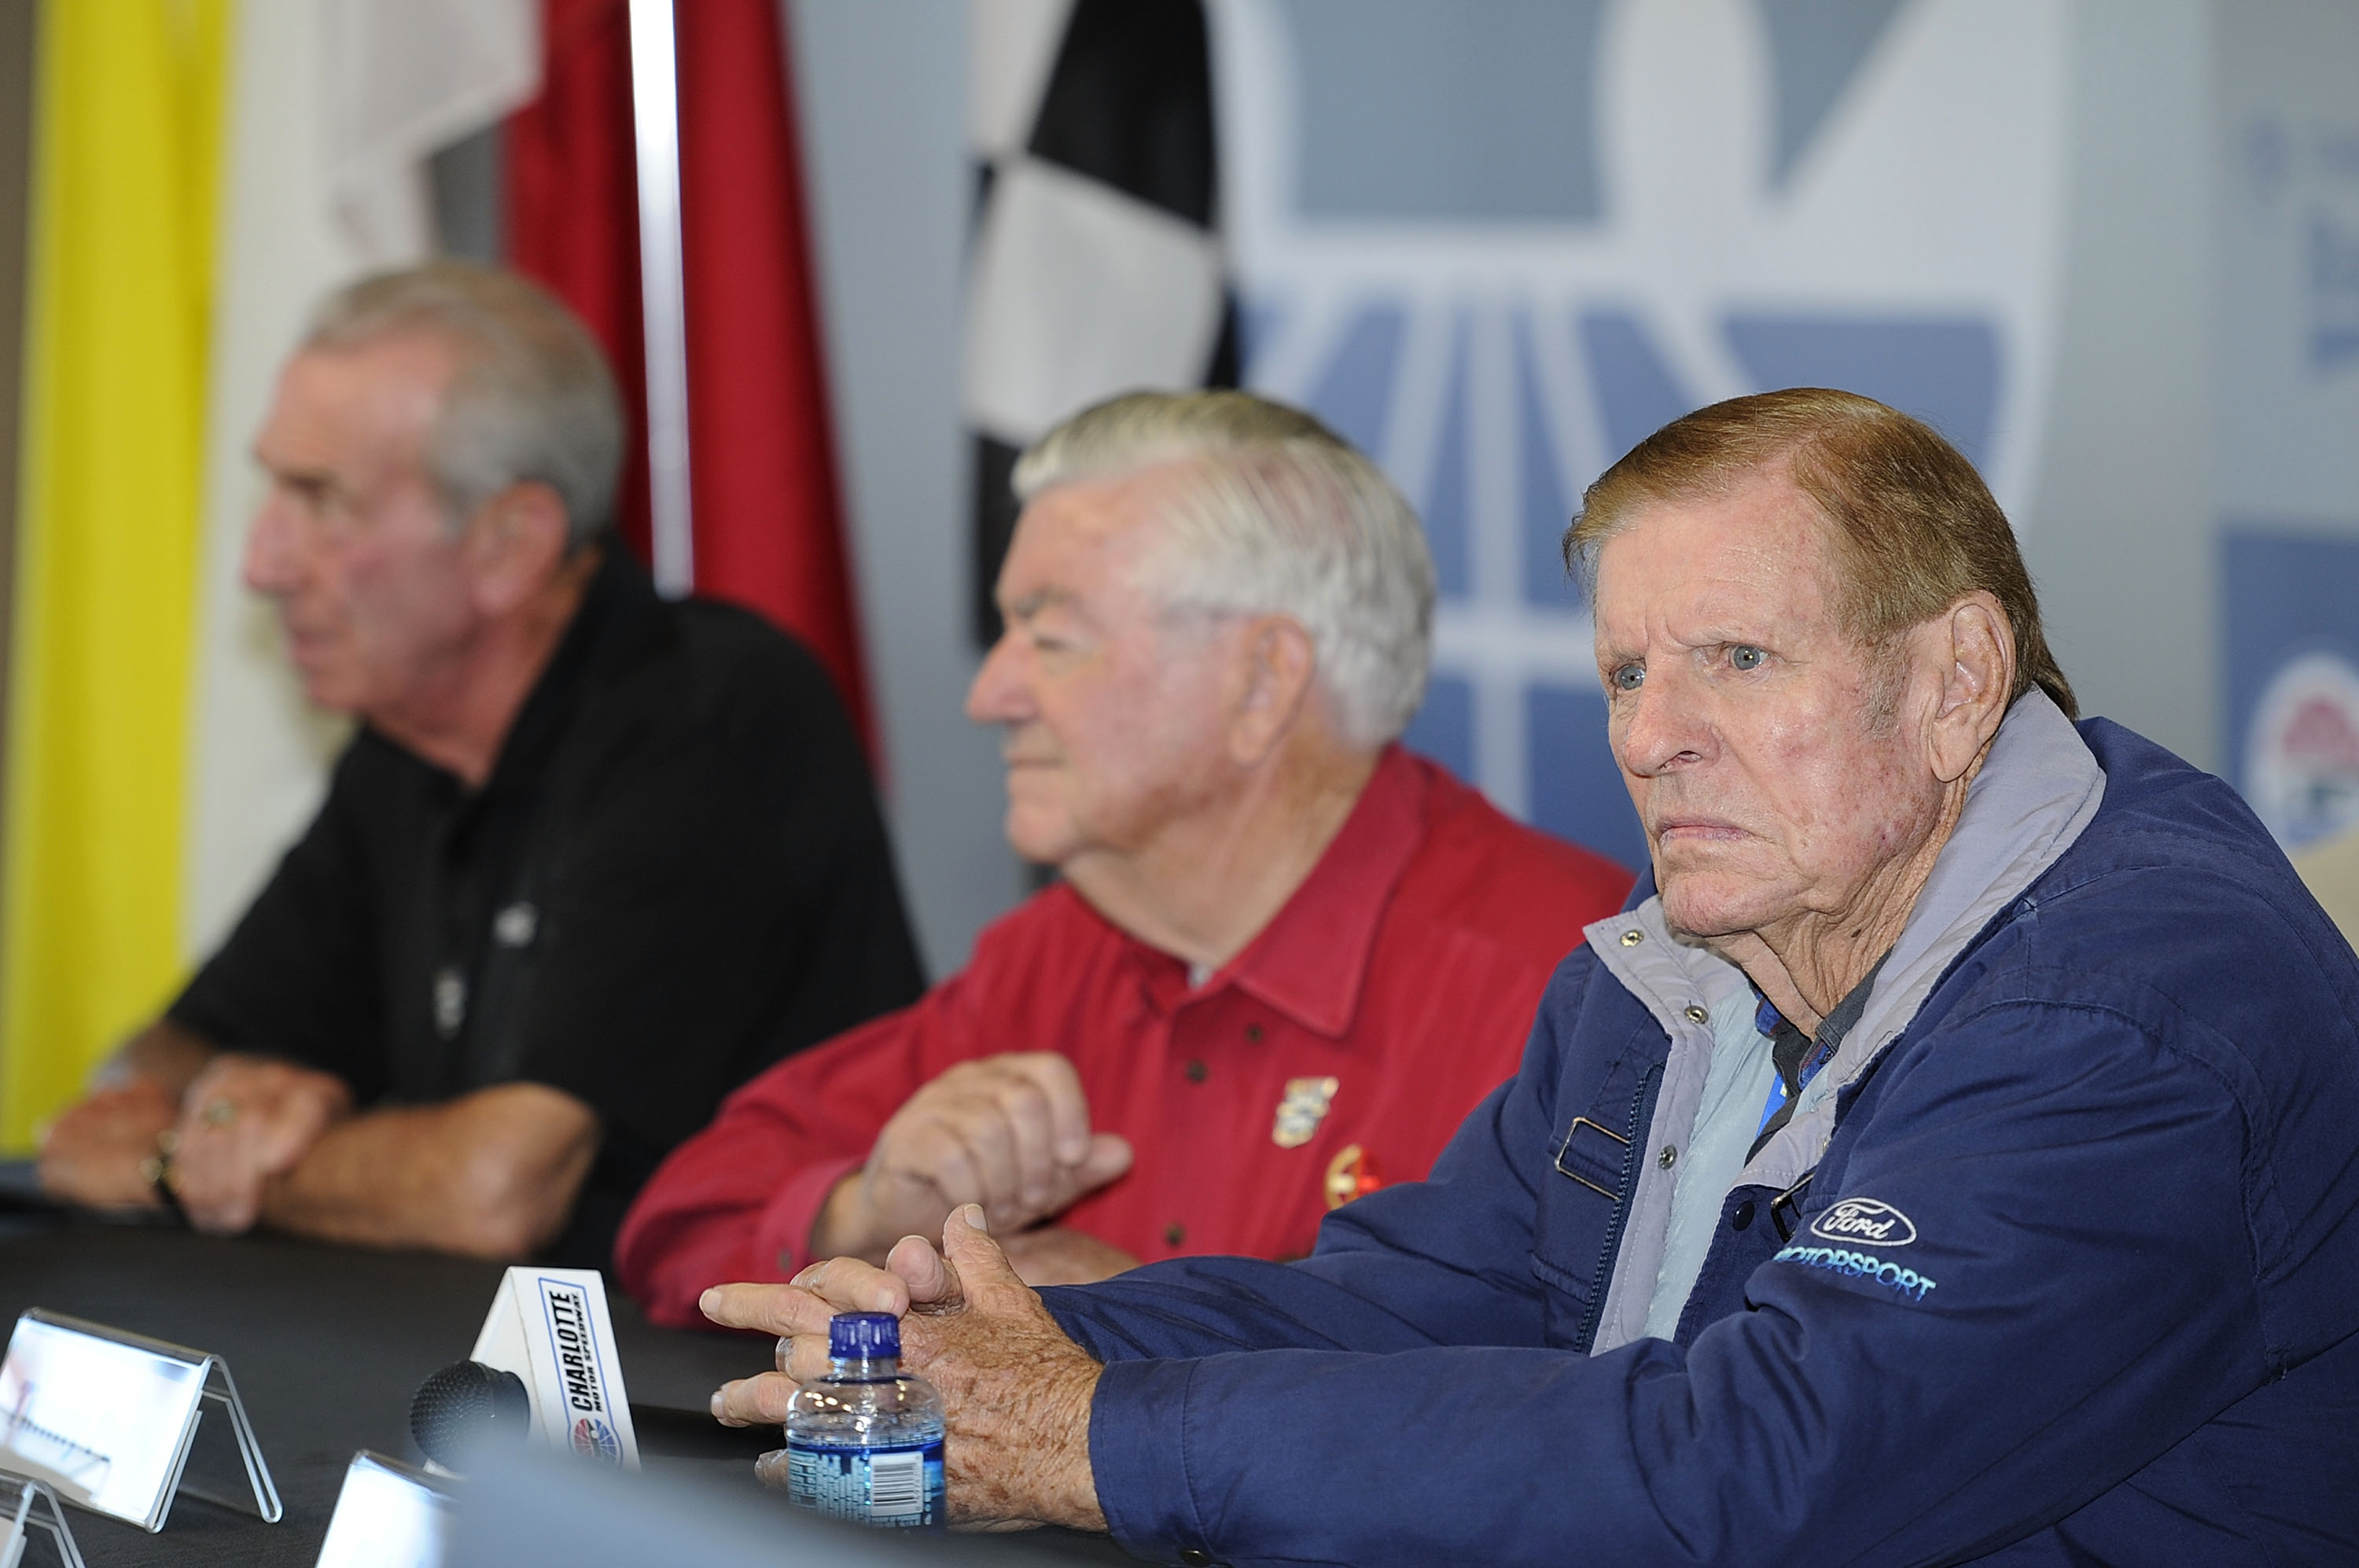 (From left to right) Ned Jarrett, Bobby Allison, and Bud Moore are three of the five 2011 inductees for the NASCAR Hall of Fame.